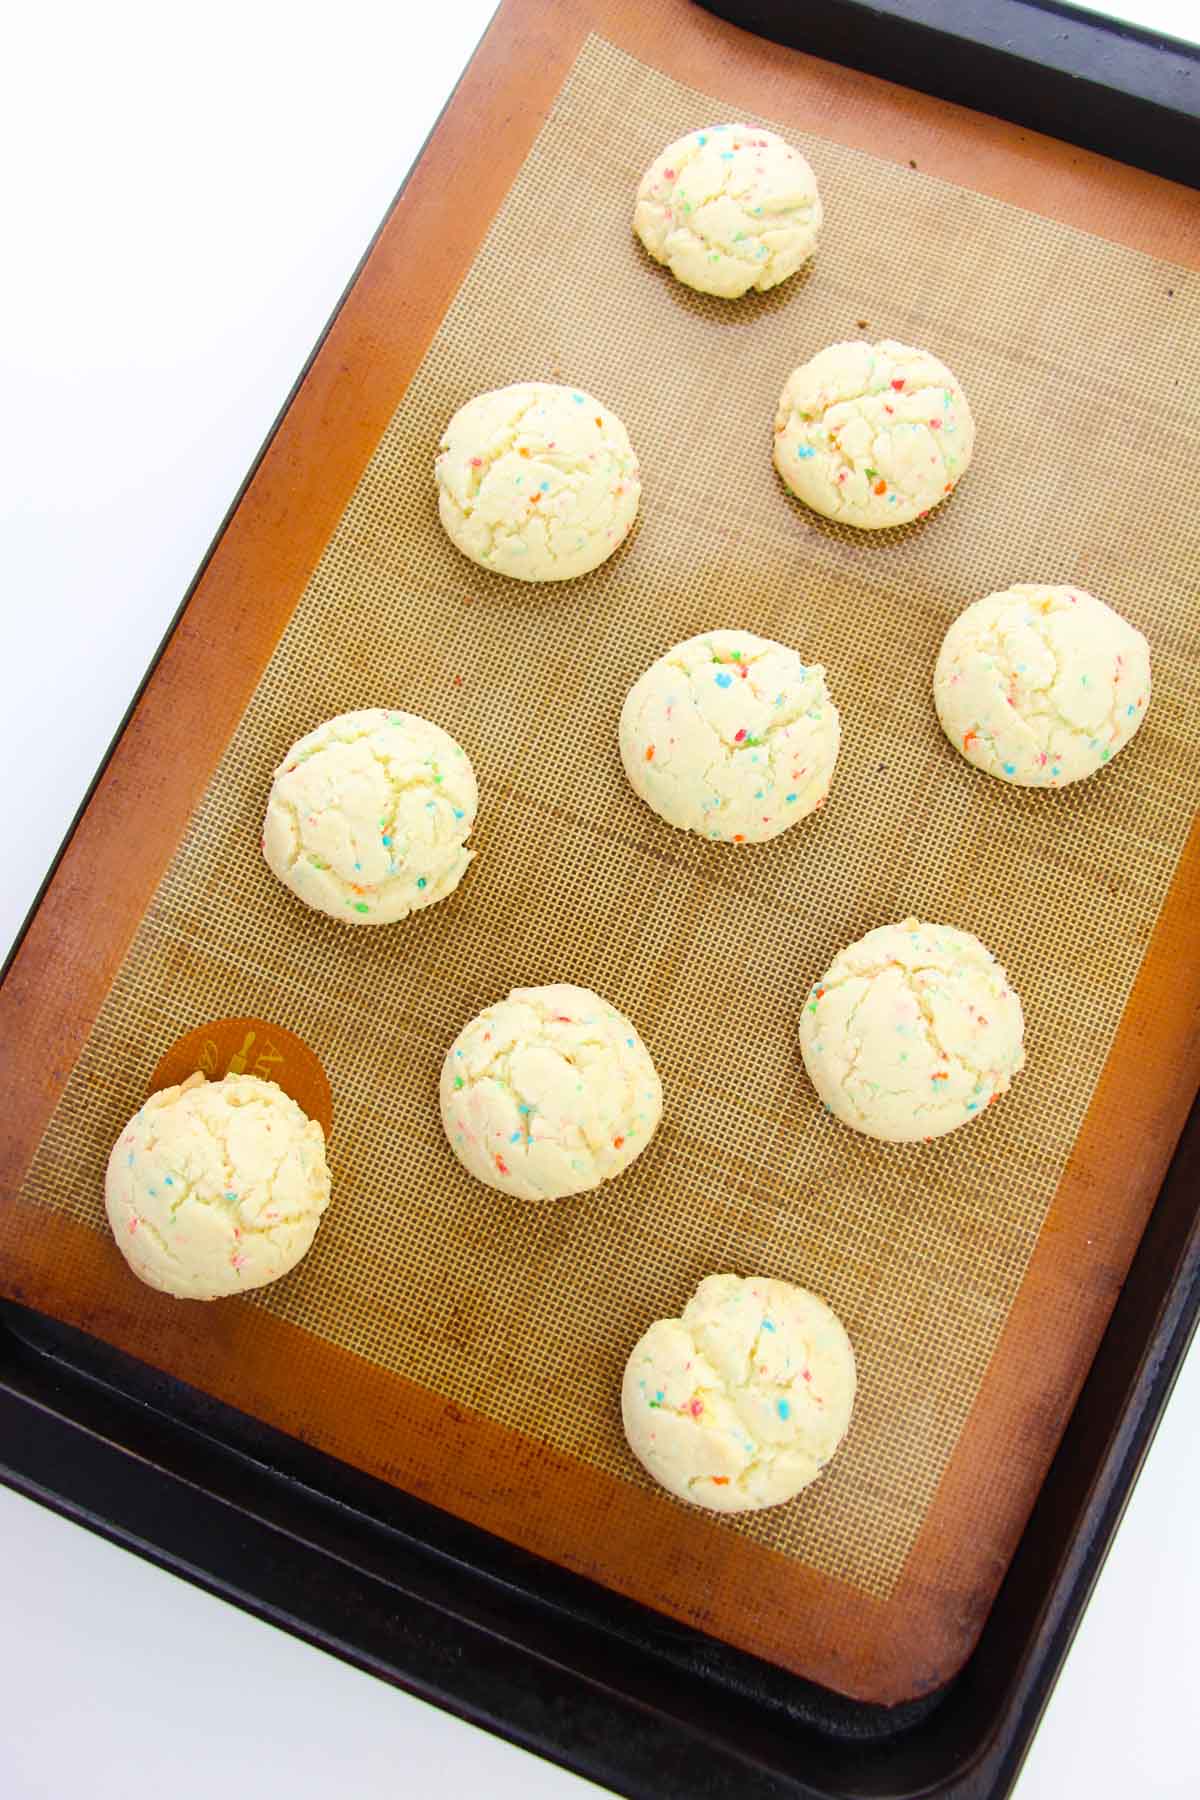 Cookies on a baking sheet lined with a silicone mat.